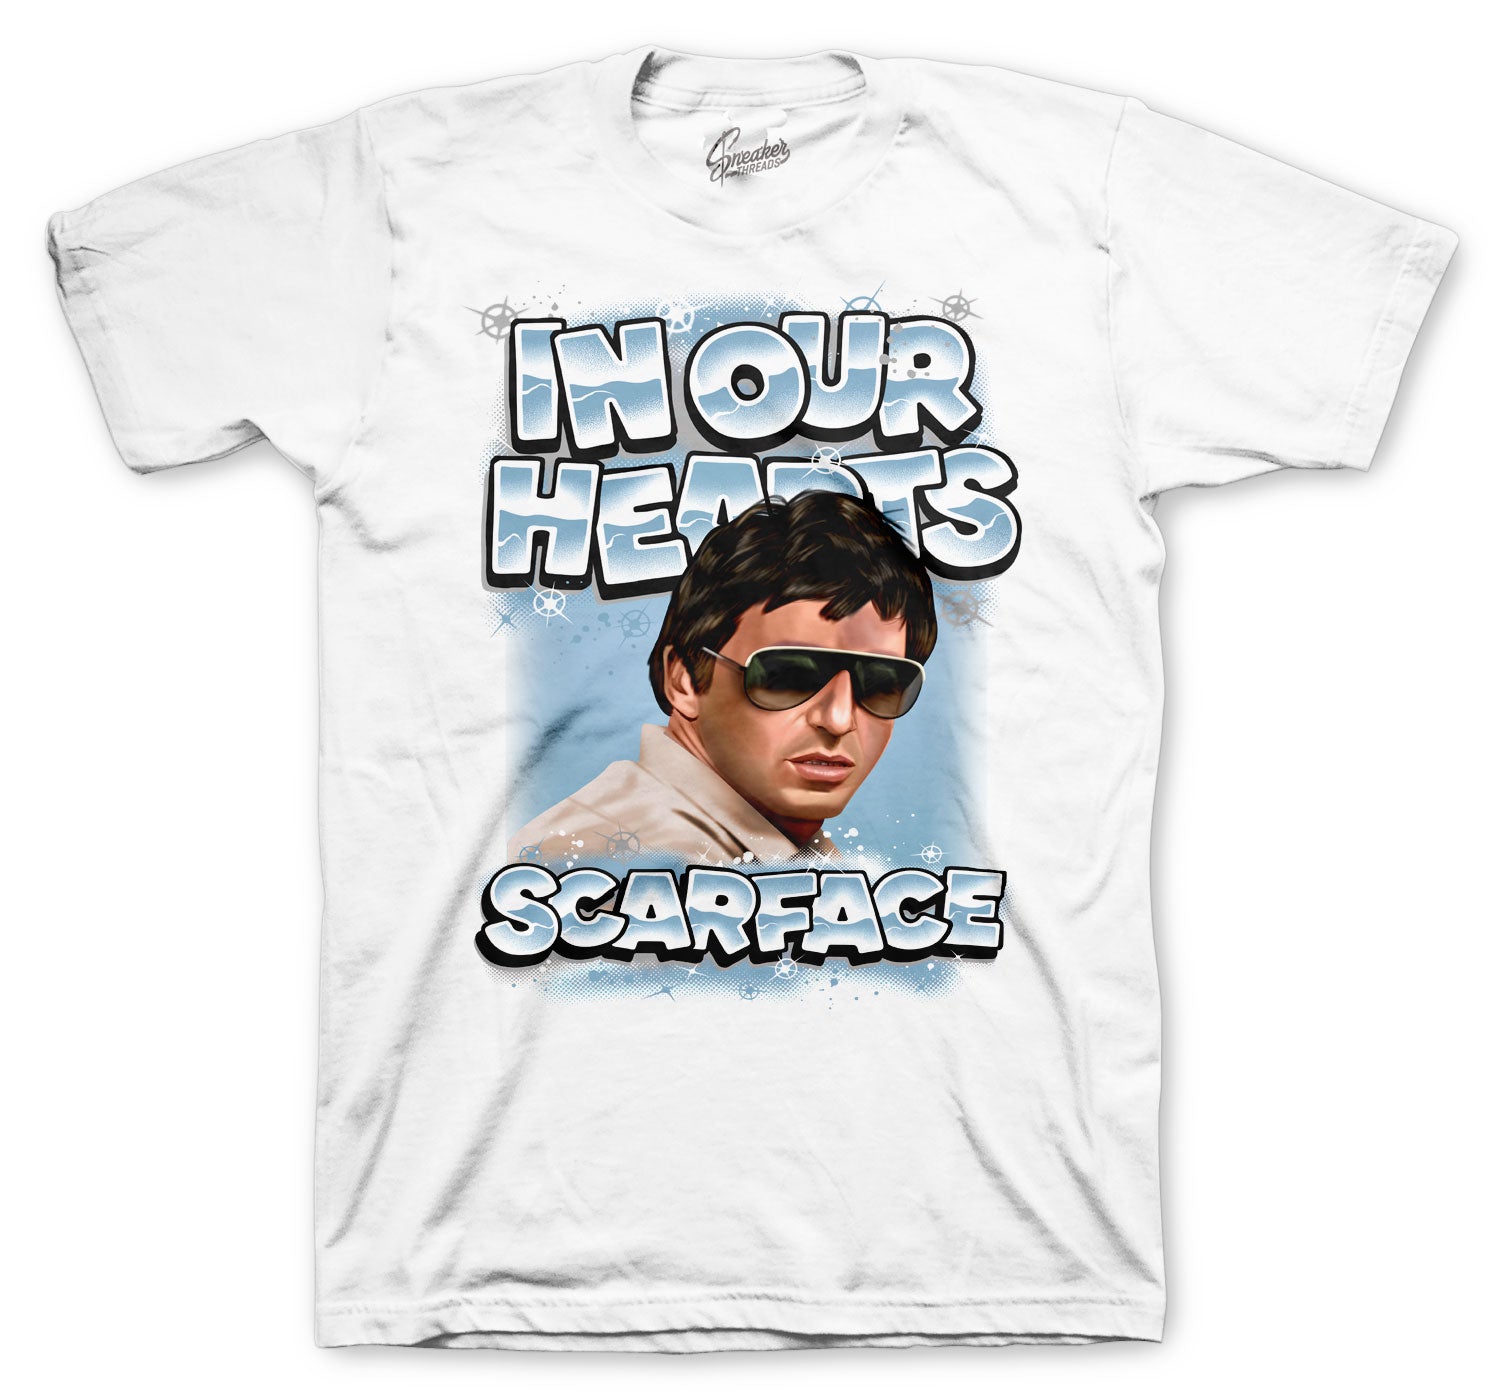 350 Blue Tint Shirt - In Our Hearts - White